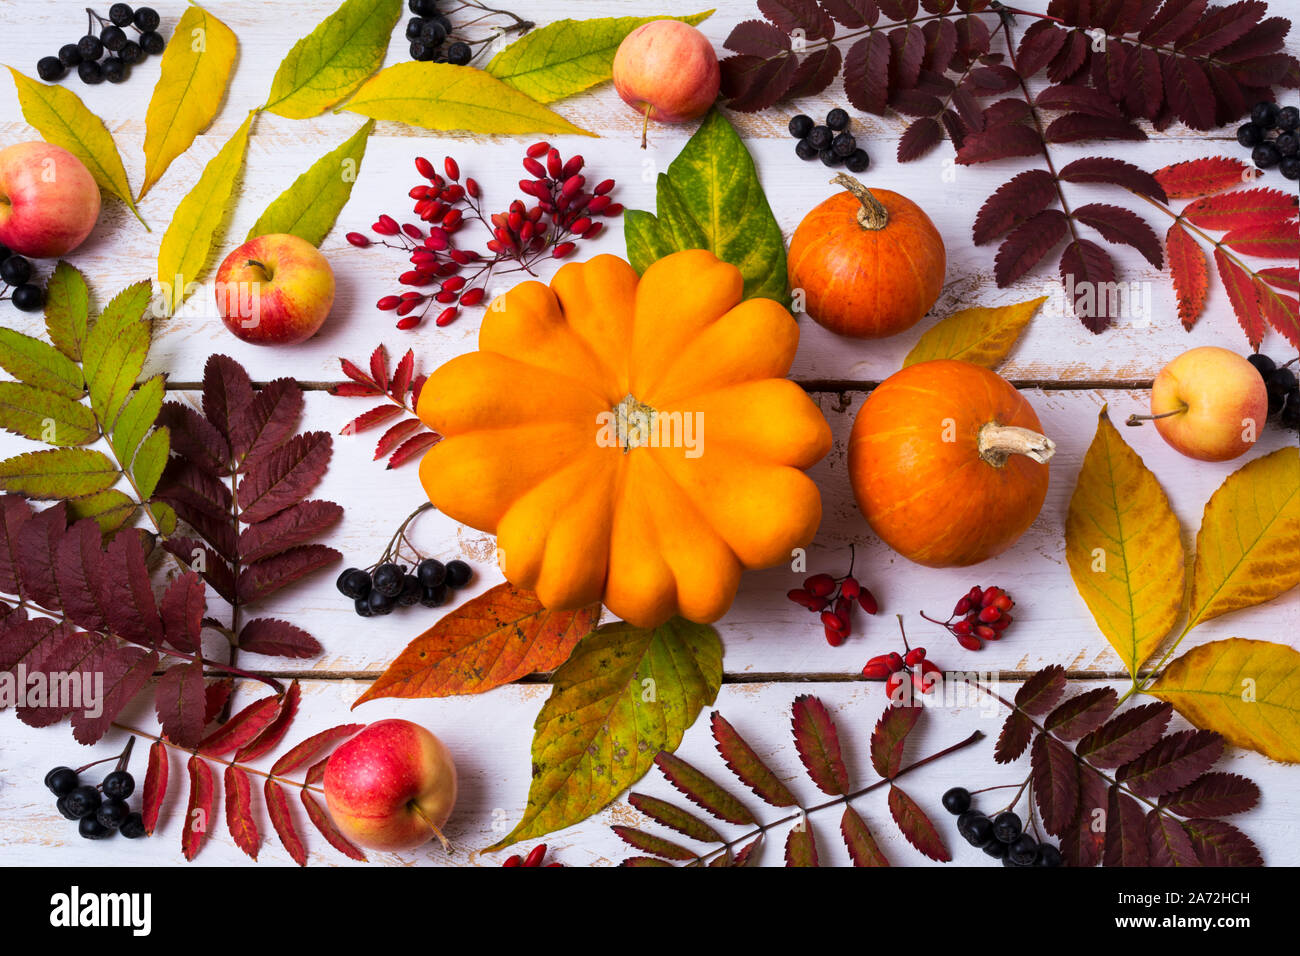 Thanksgiving rustic decor with pumpkin, apple, red and black berries, fall leaves on the white painted wooden background Stock Photo